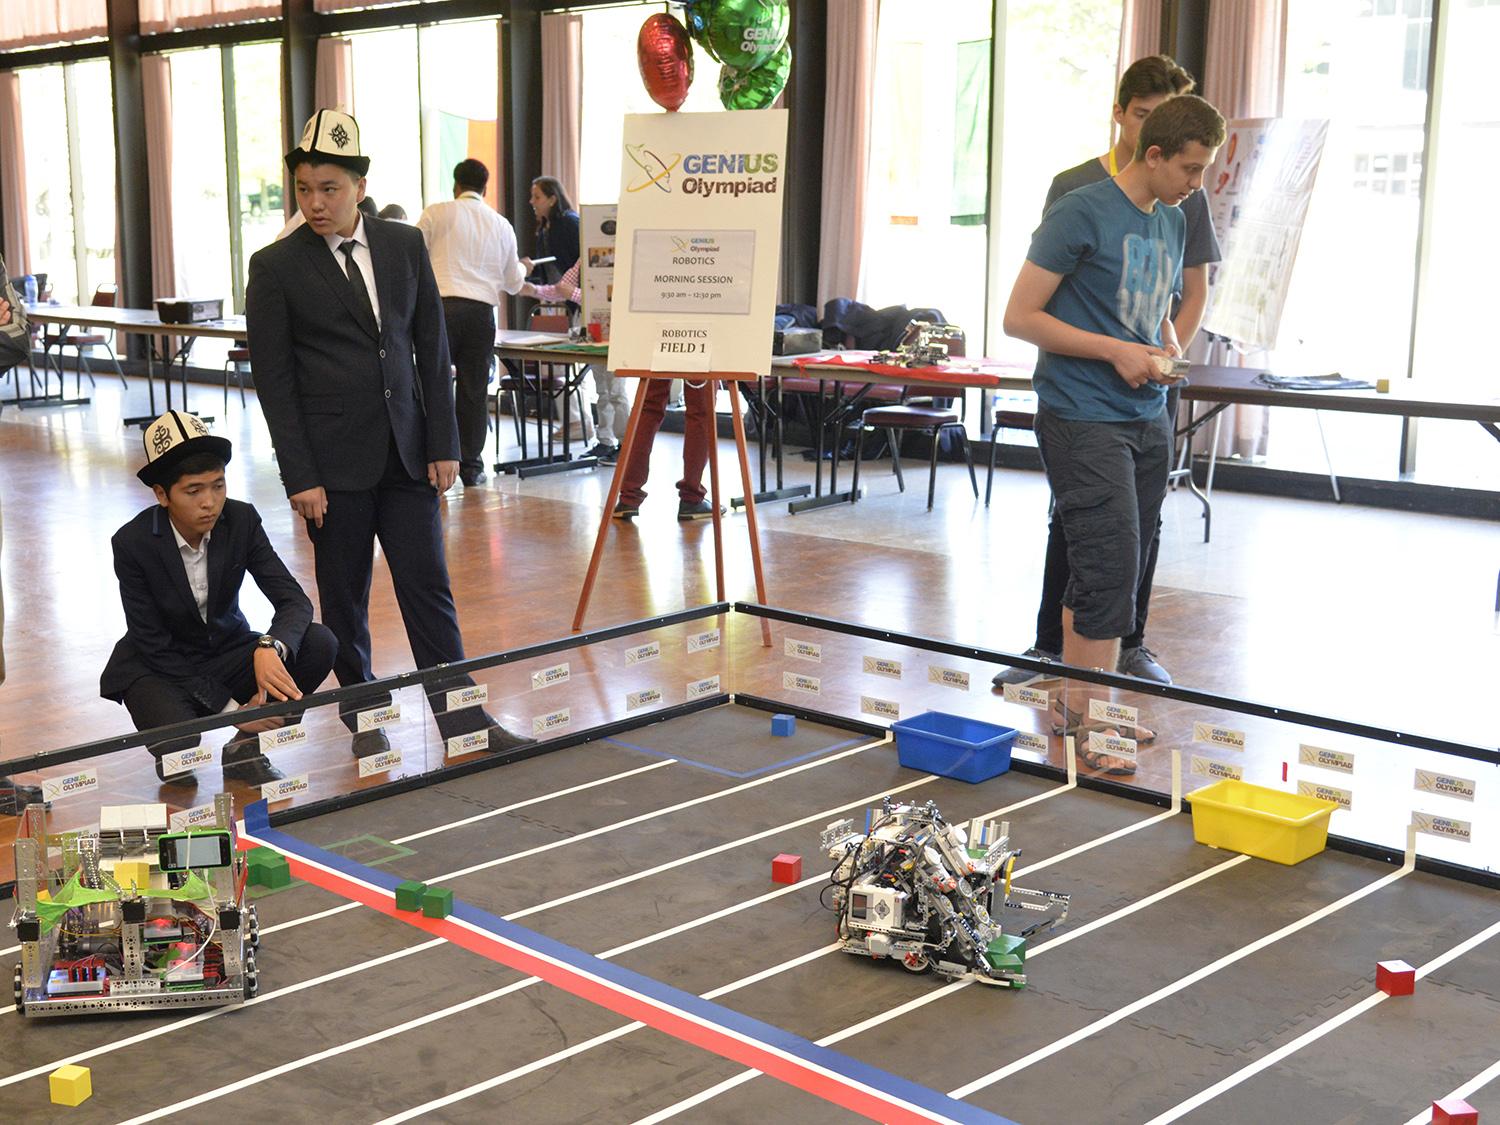 Students take part in robotics competition